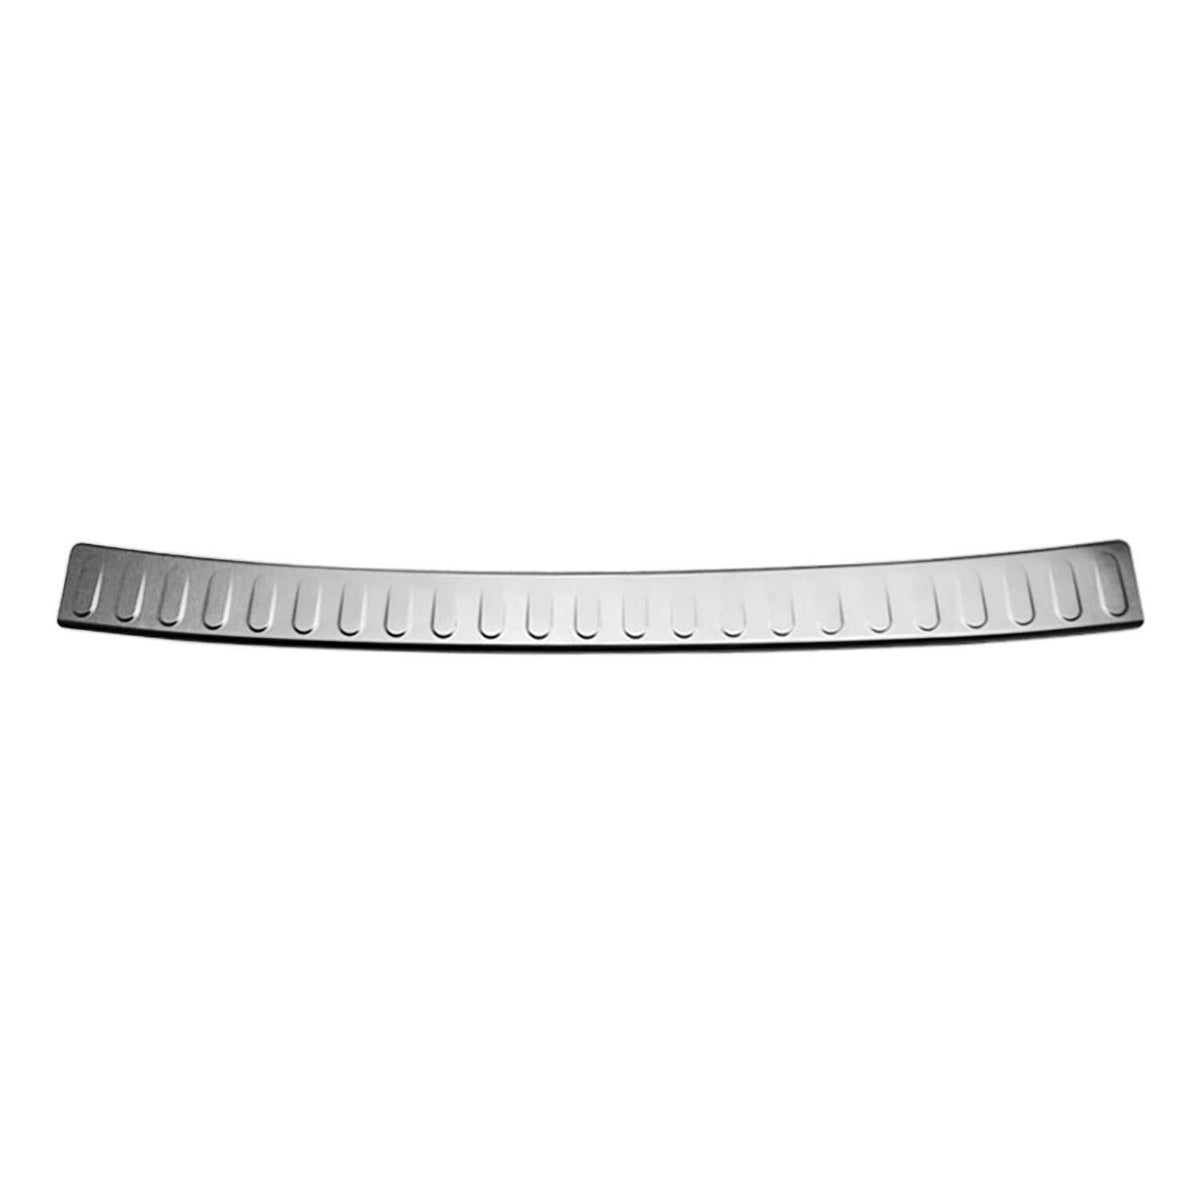 Loading sill protection for Mercedes E Class T-Model S212 2010-2013 Brushed chrome